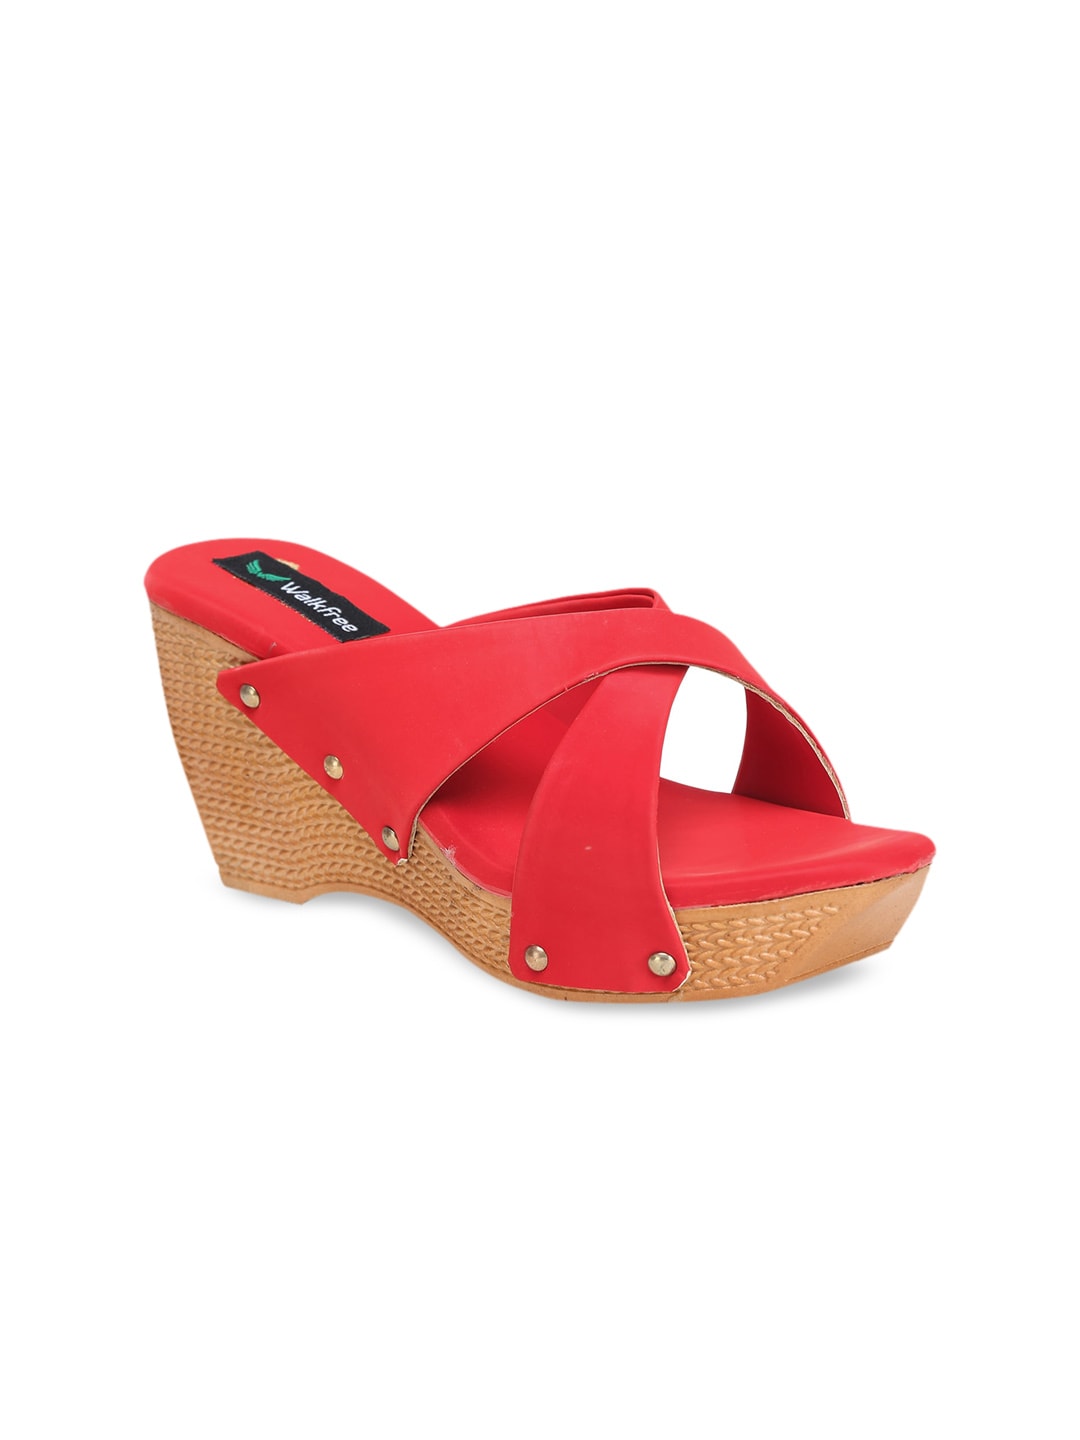 Walkfree Red Wedge Sandals Price in India